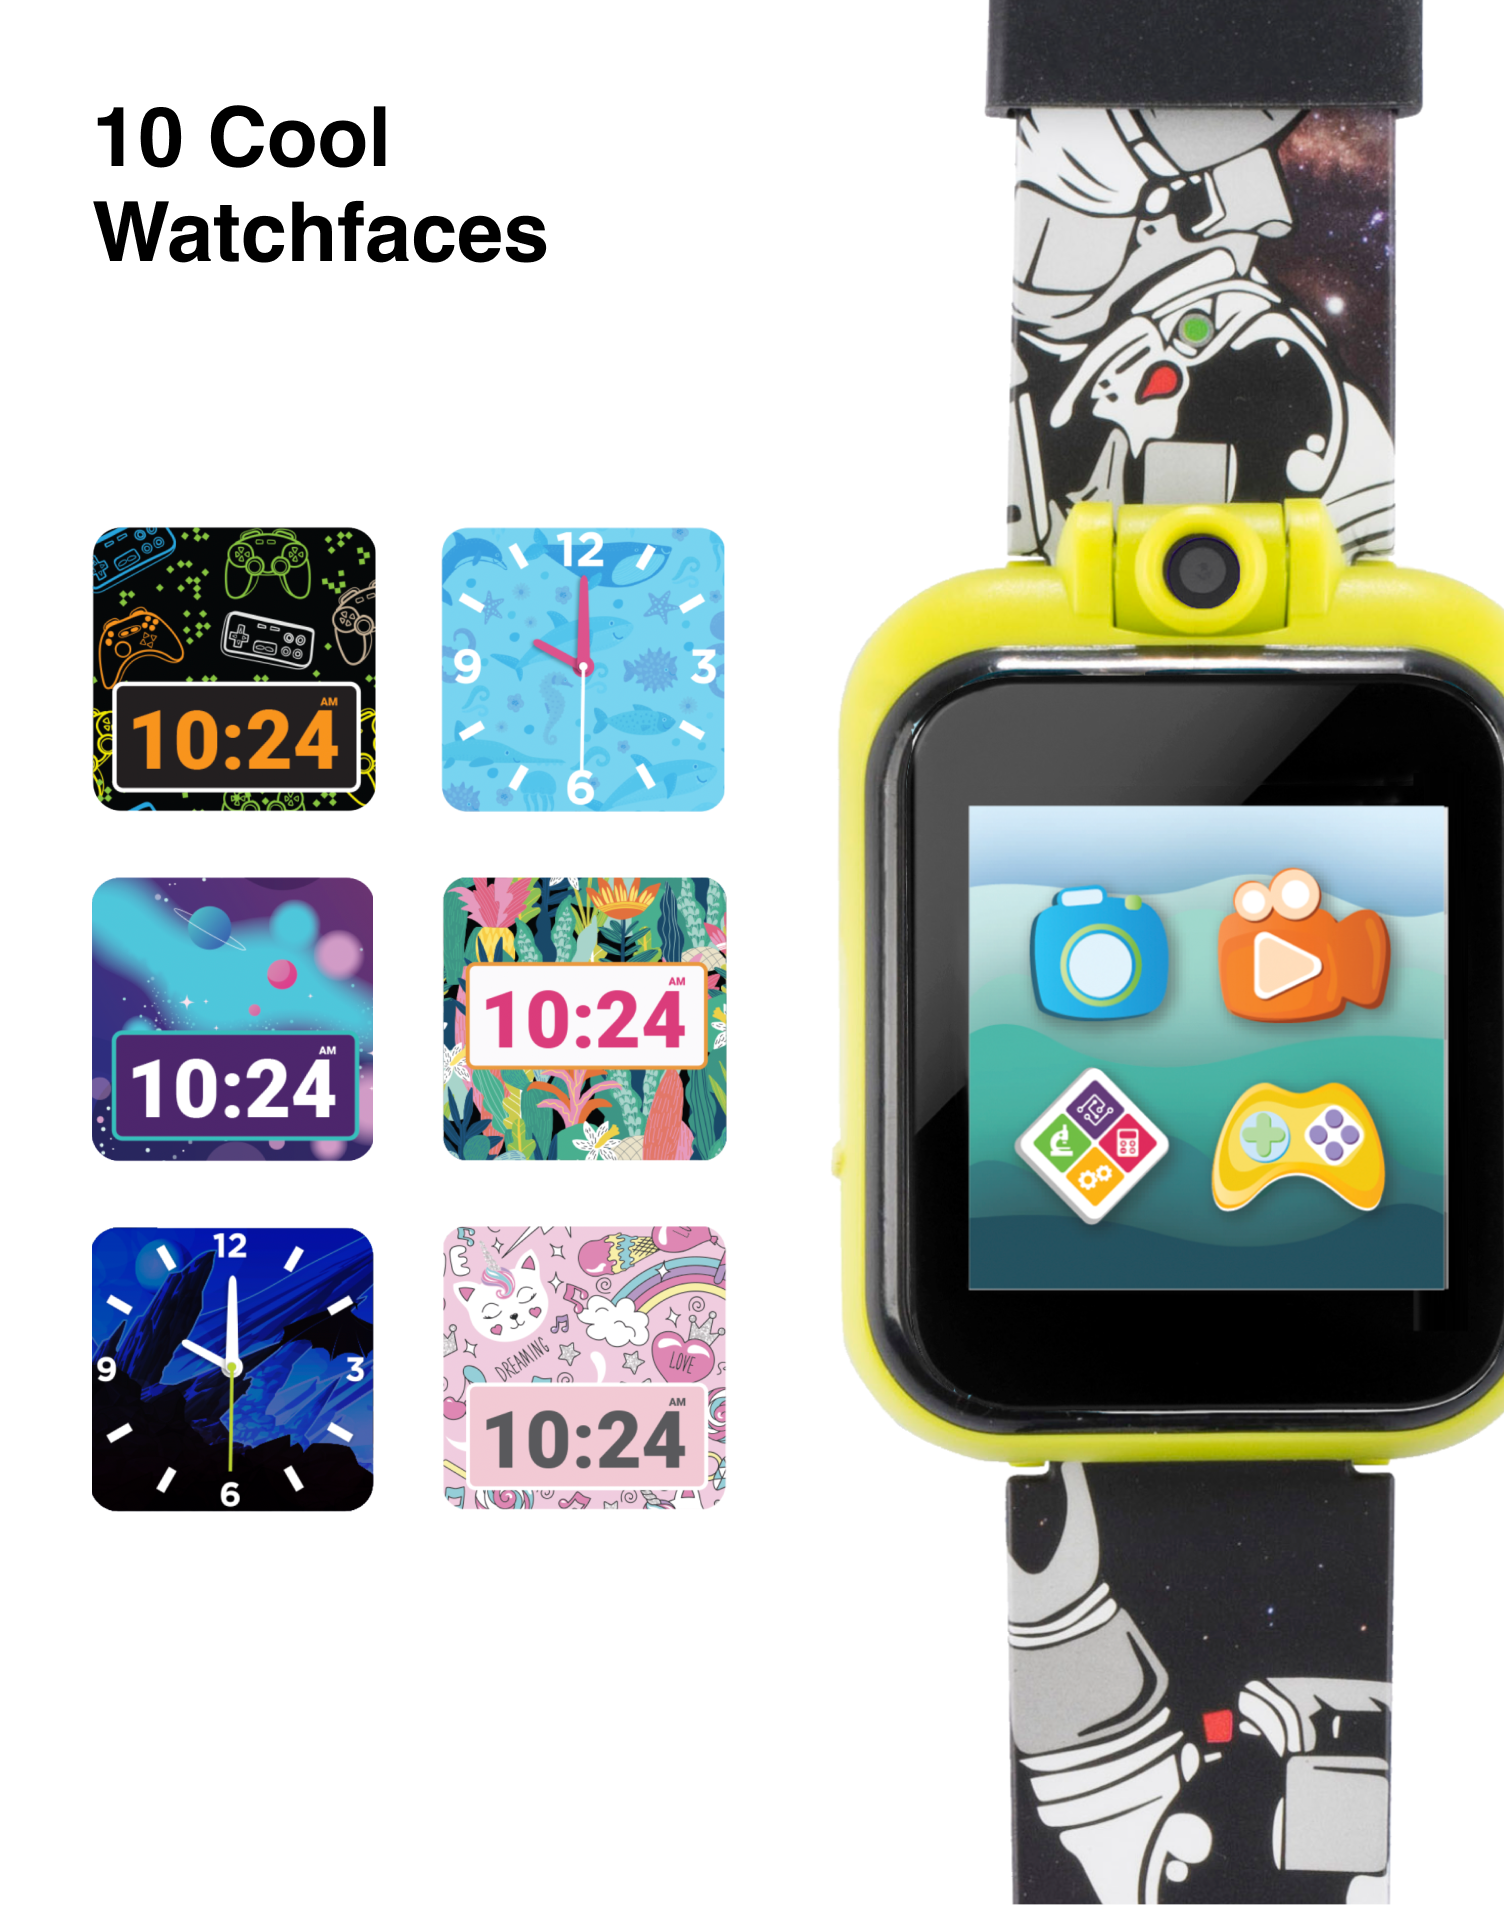 PlayZoom 2 Kids Smartwatch: Astronaut Outerspace Print in Black affordable smart watch